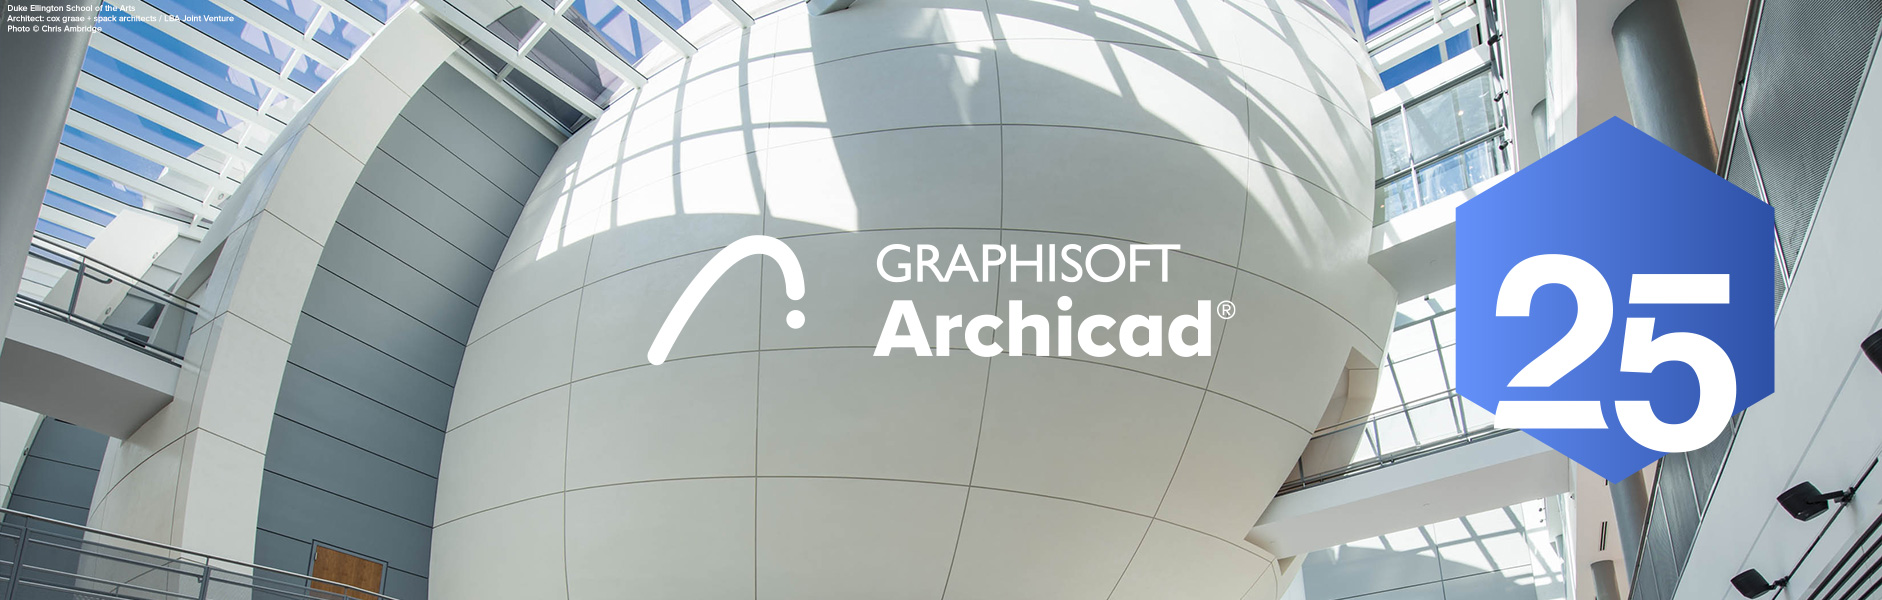 archicad 25 free download with crack 64-bit